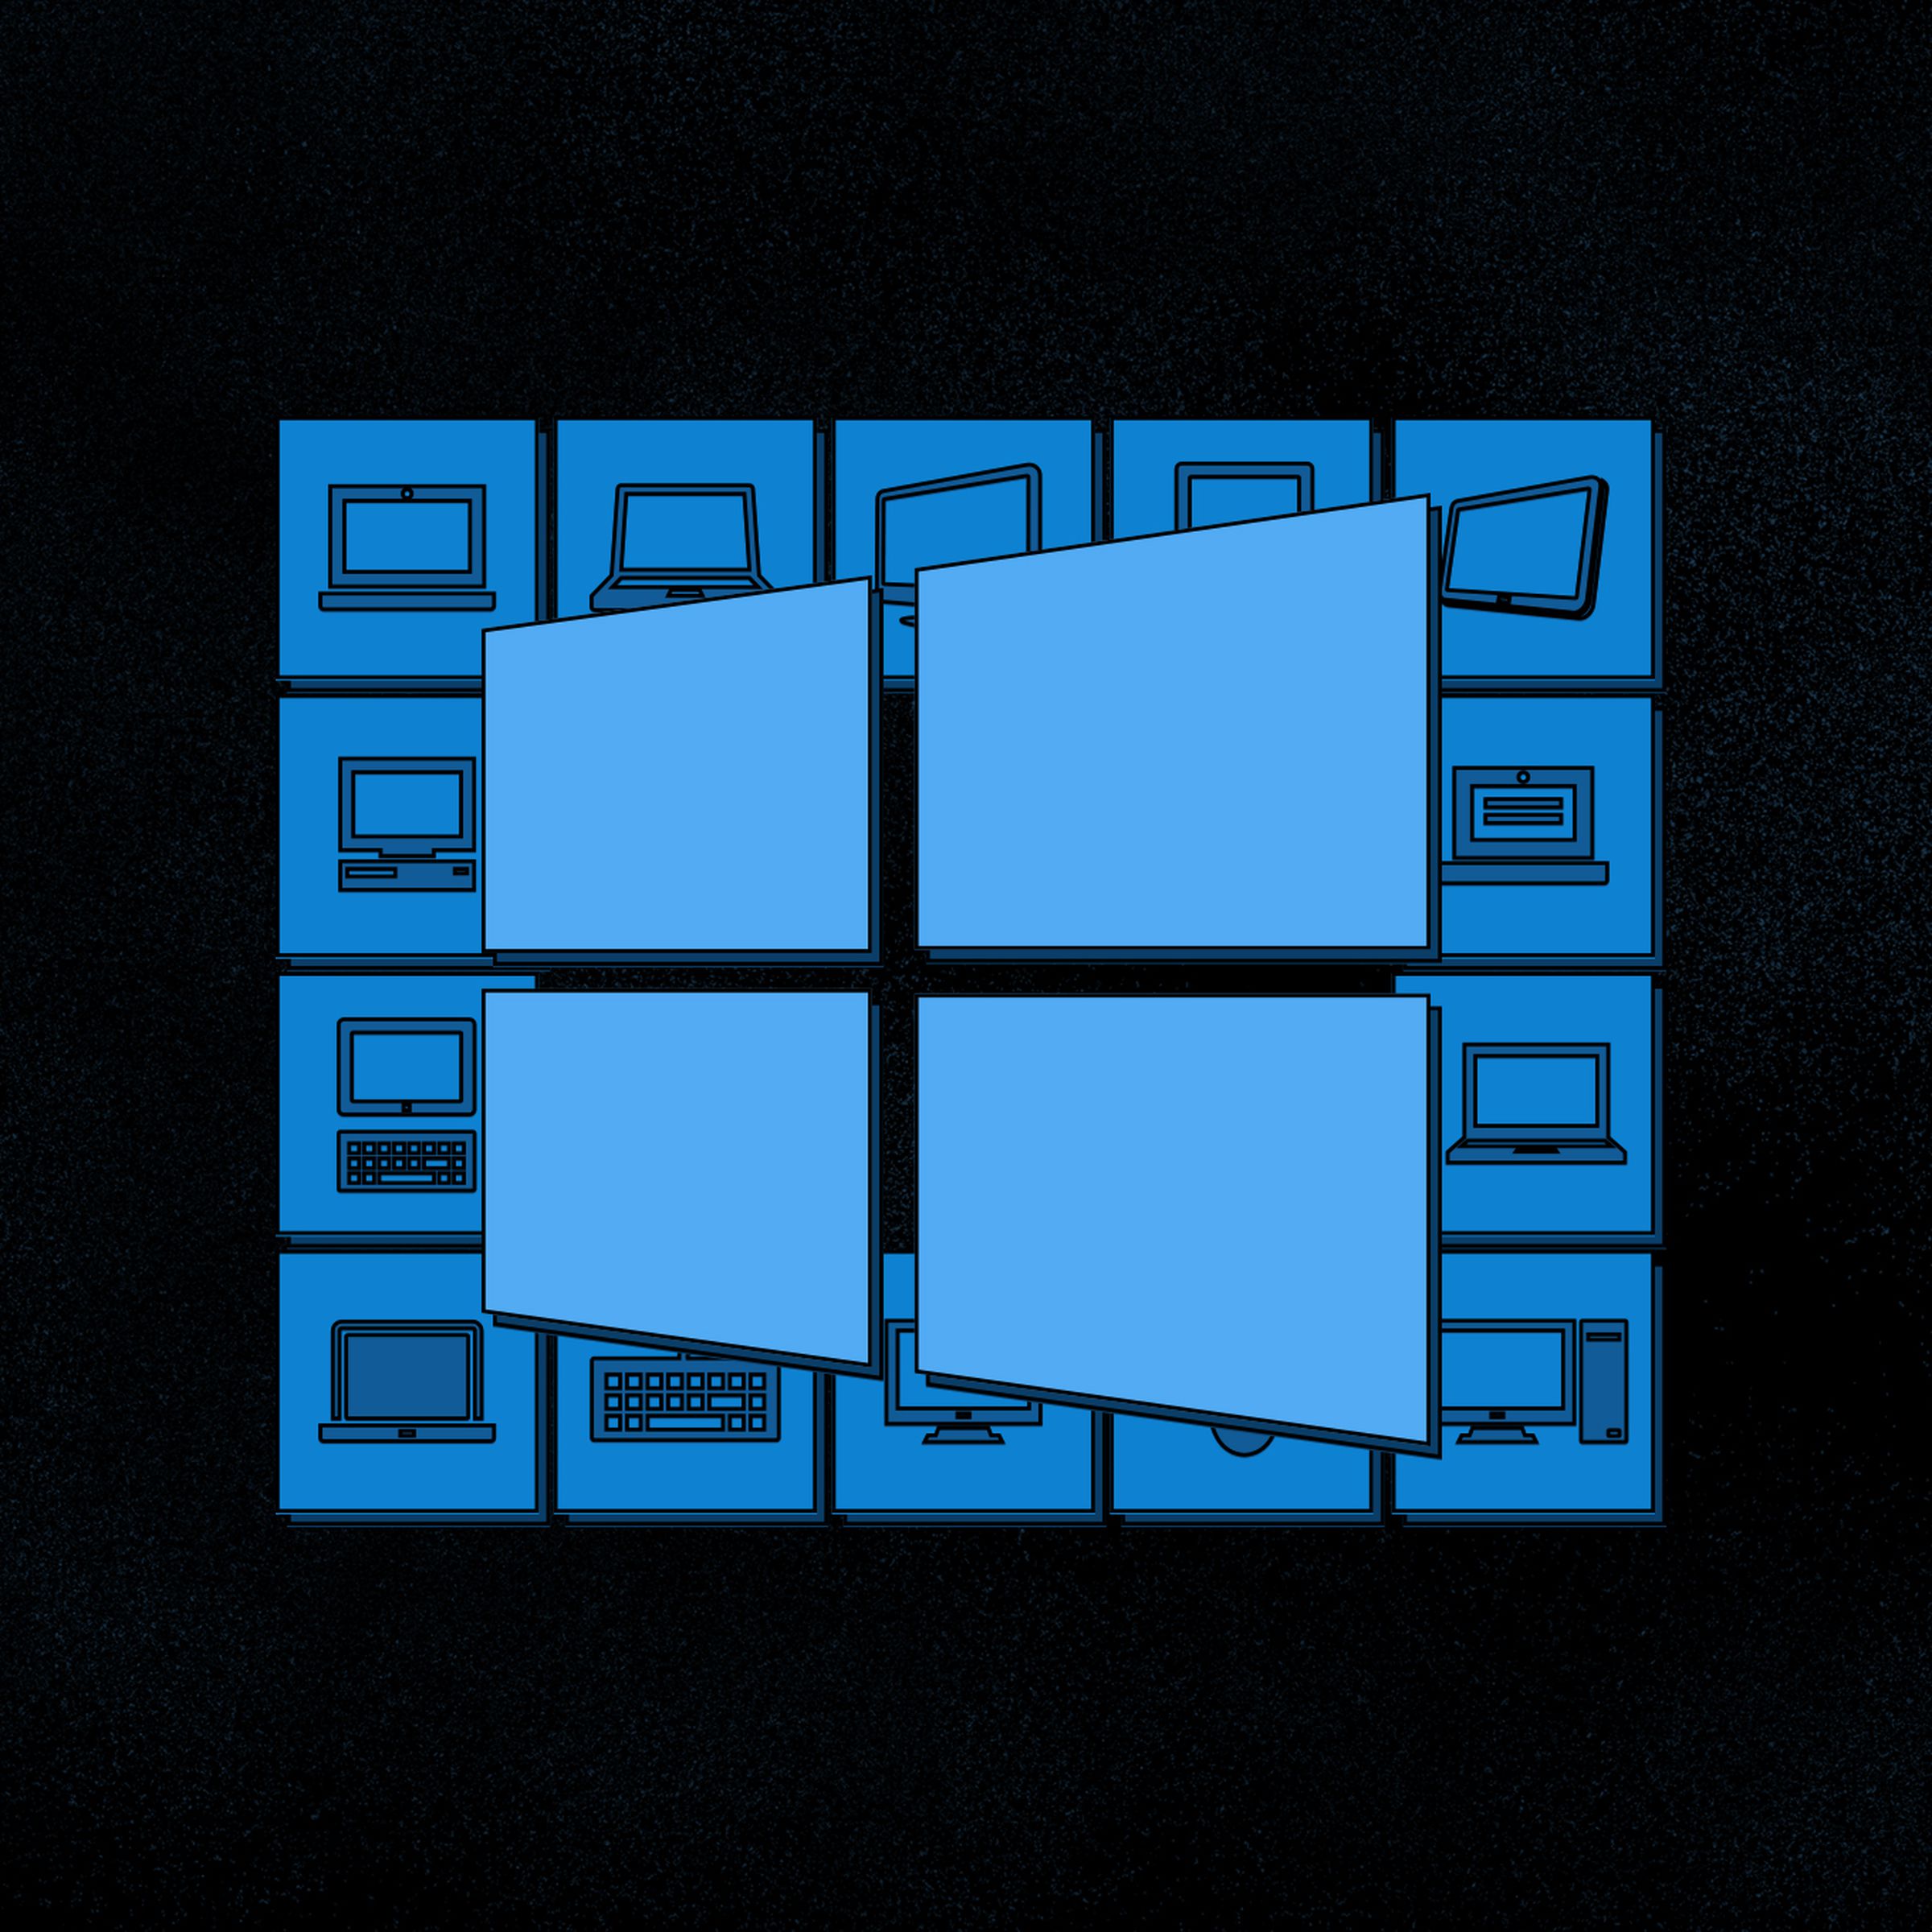 A picture of the Windows logo on a background of squares with various glyphs that look like computers.